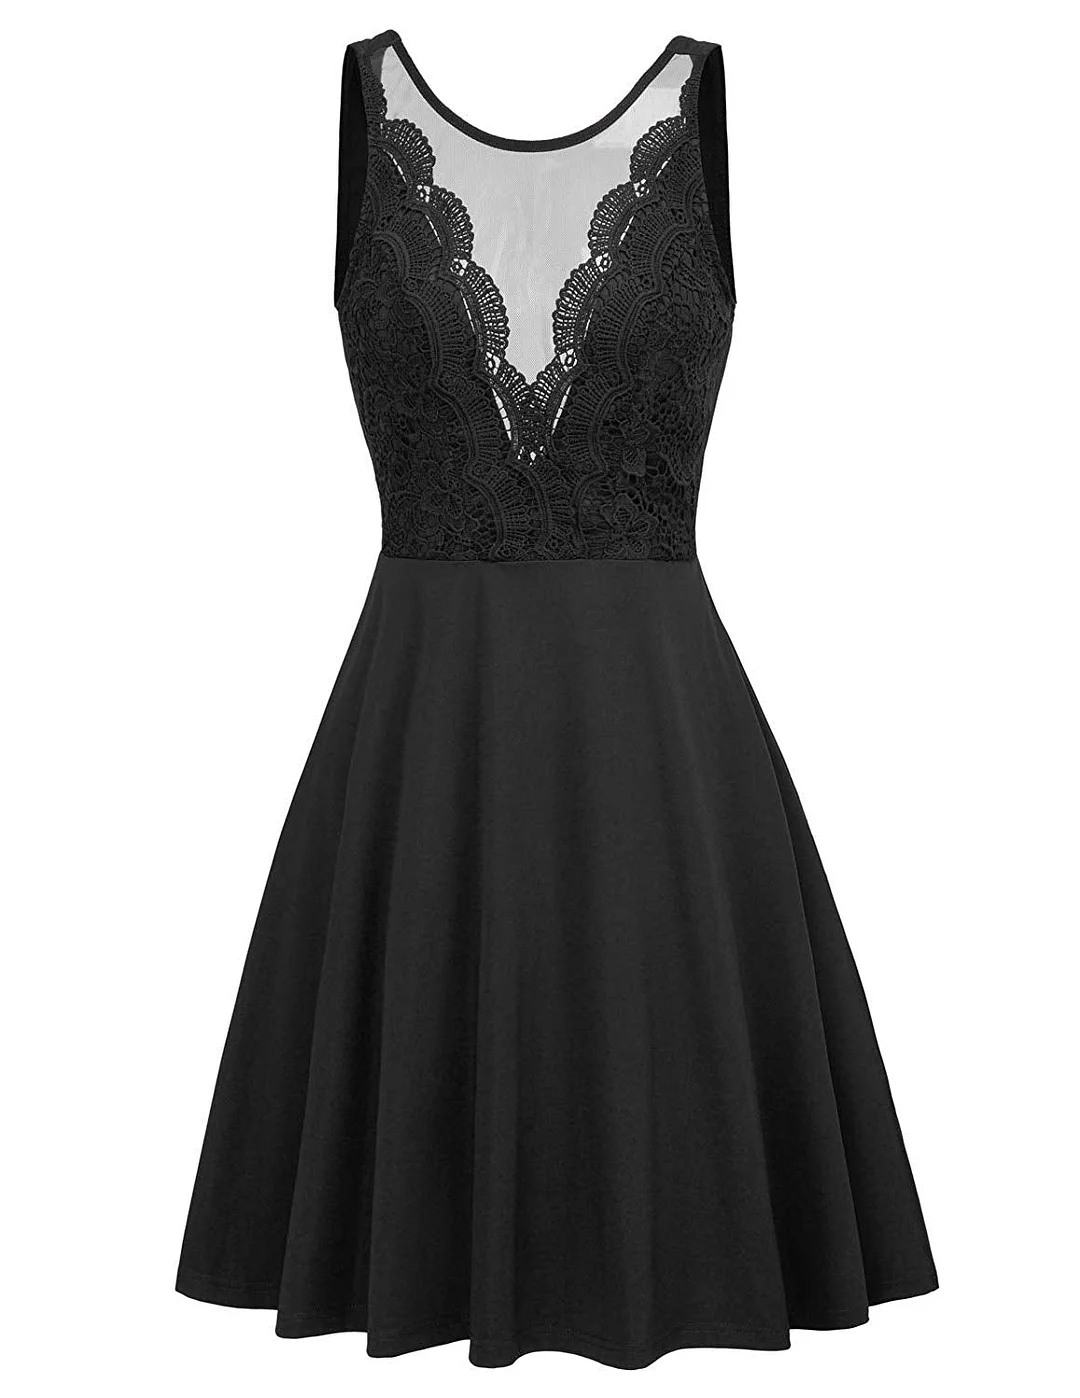 Women Sleeveless Lace Patchwork Open Back A Line Flare Party Dress